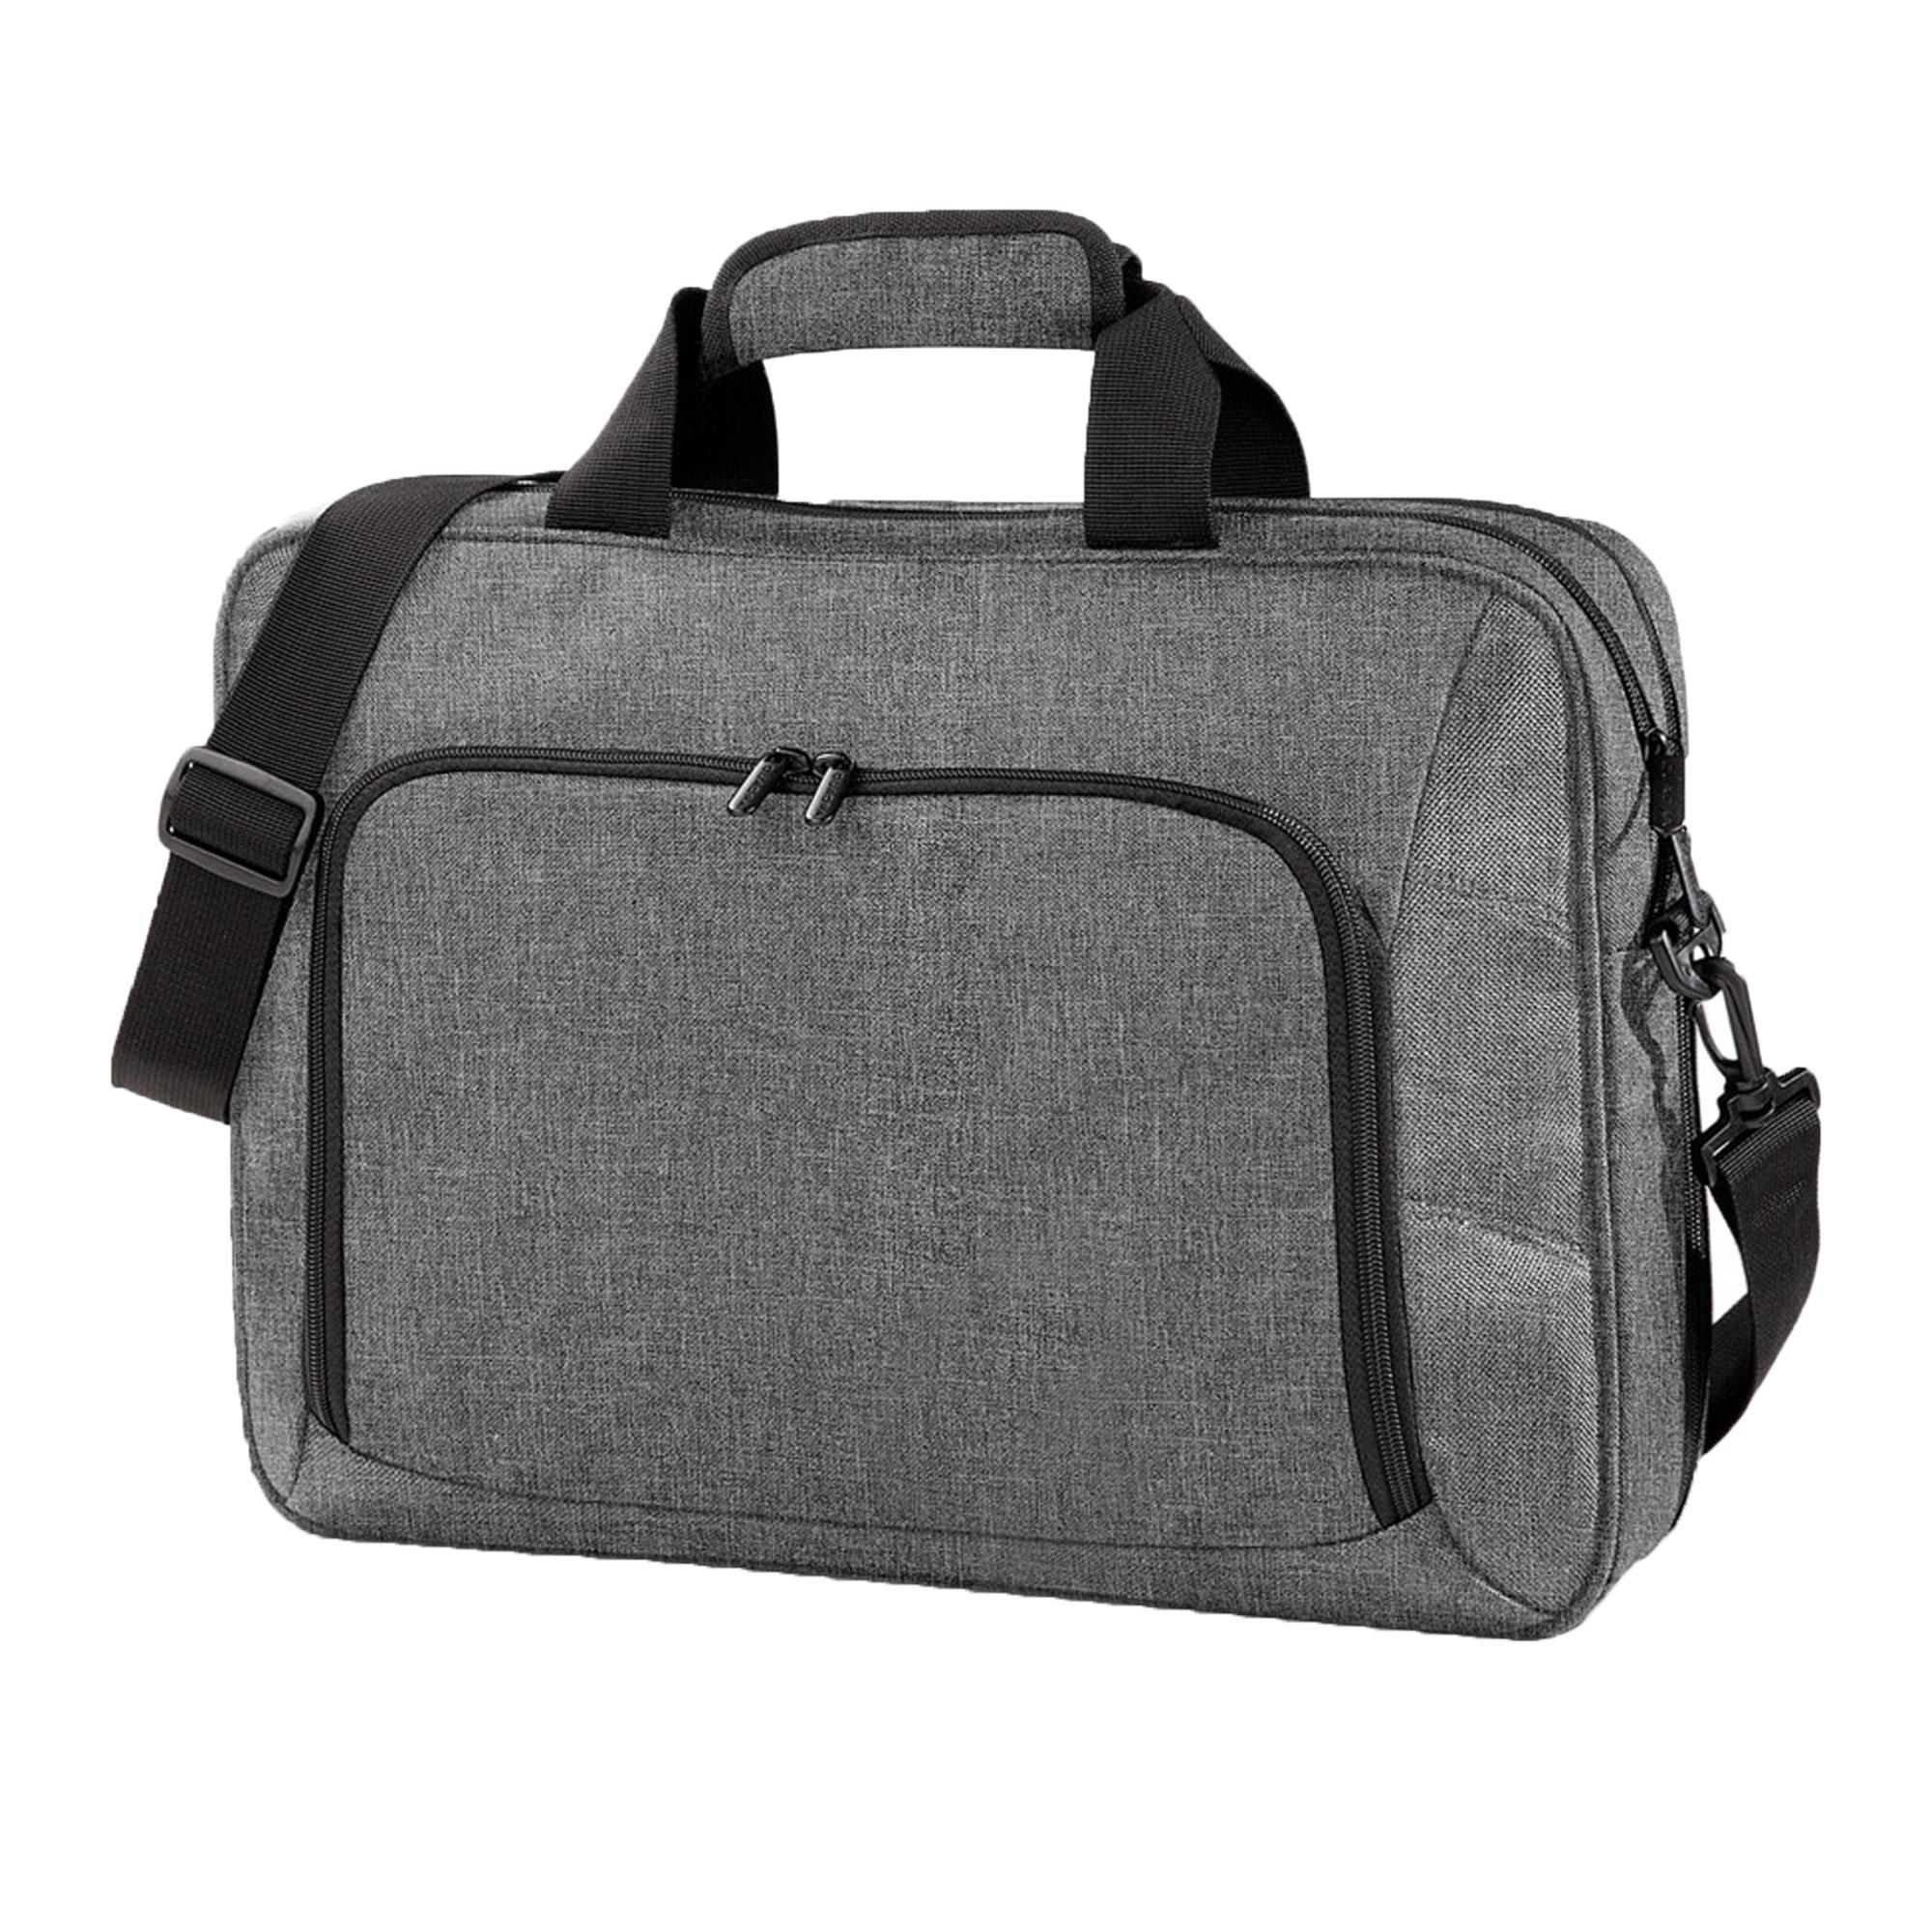 Quadra Executive Digital Office Bag (17inch Laptop Compatible) (Grey Marl) (One Size)